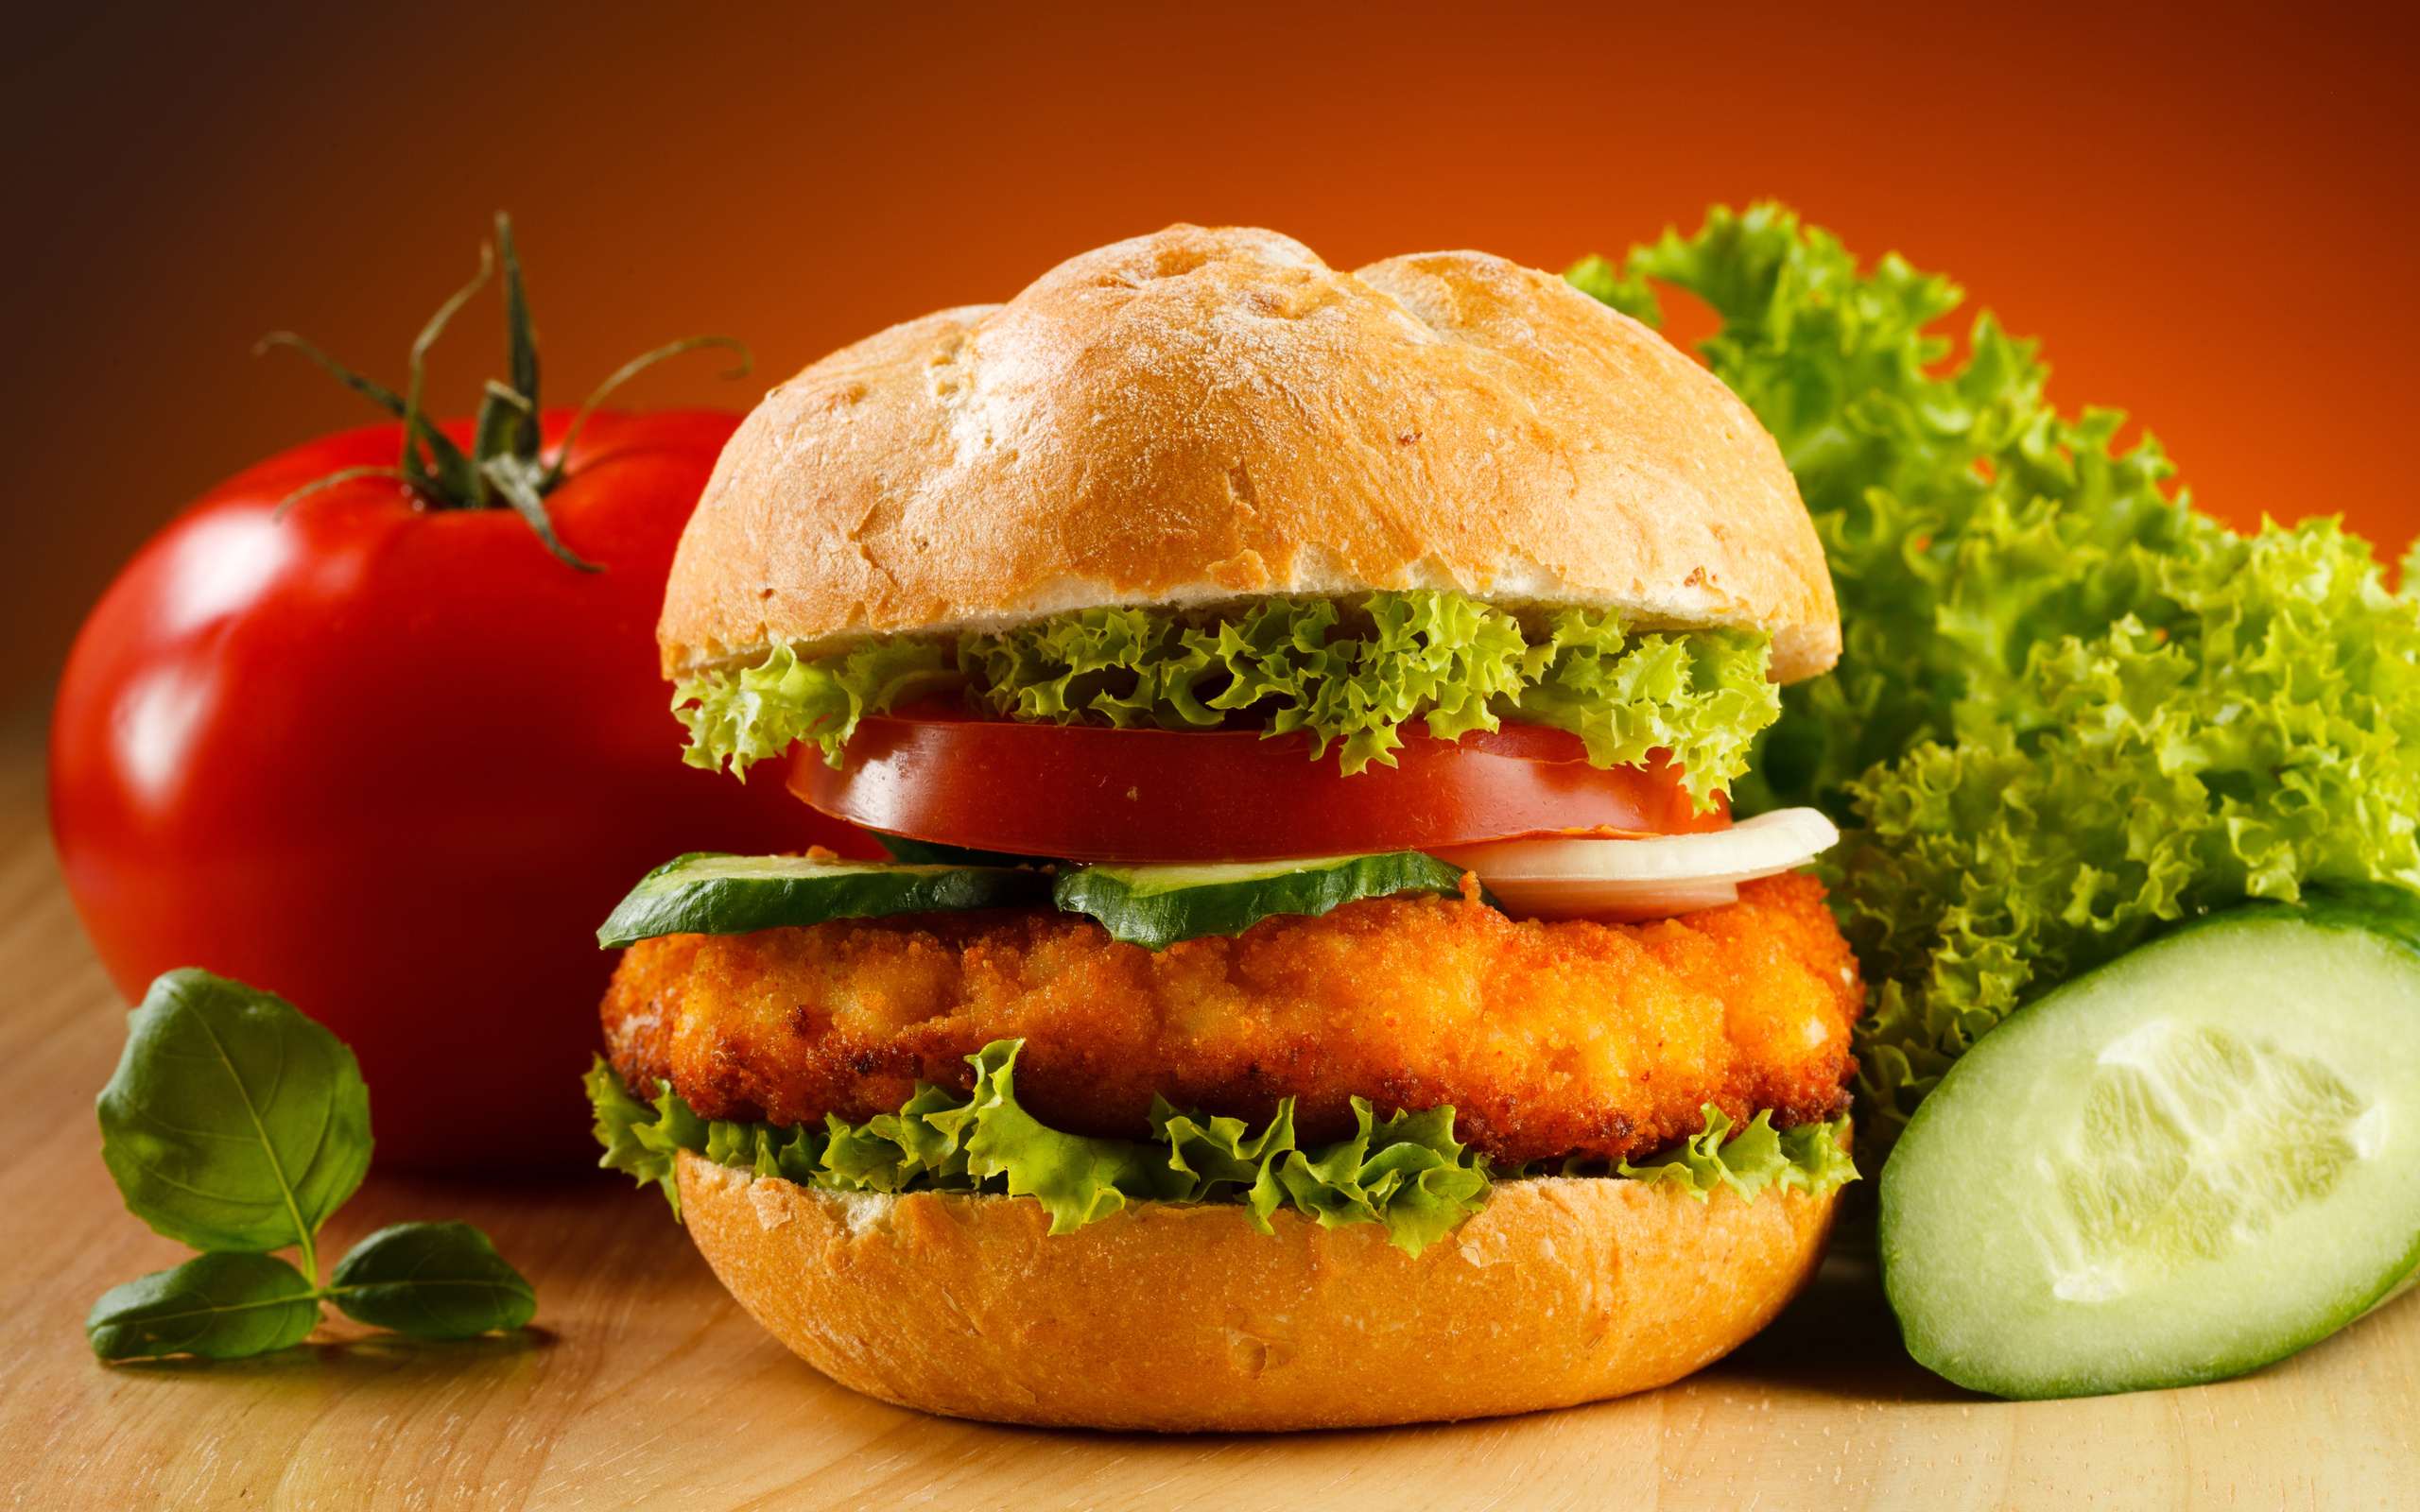 Hamburger: Served as a street food or in casual diners, American cuisine. 2560x1600 HD Wallpaper.